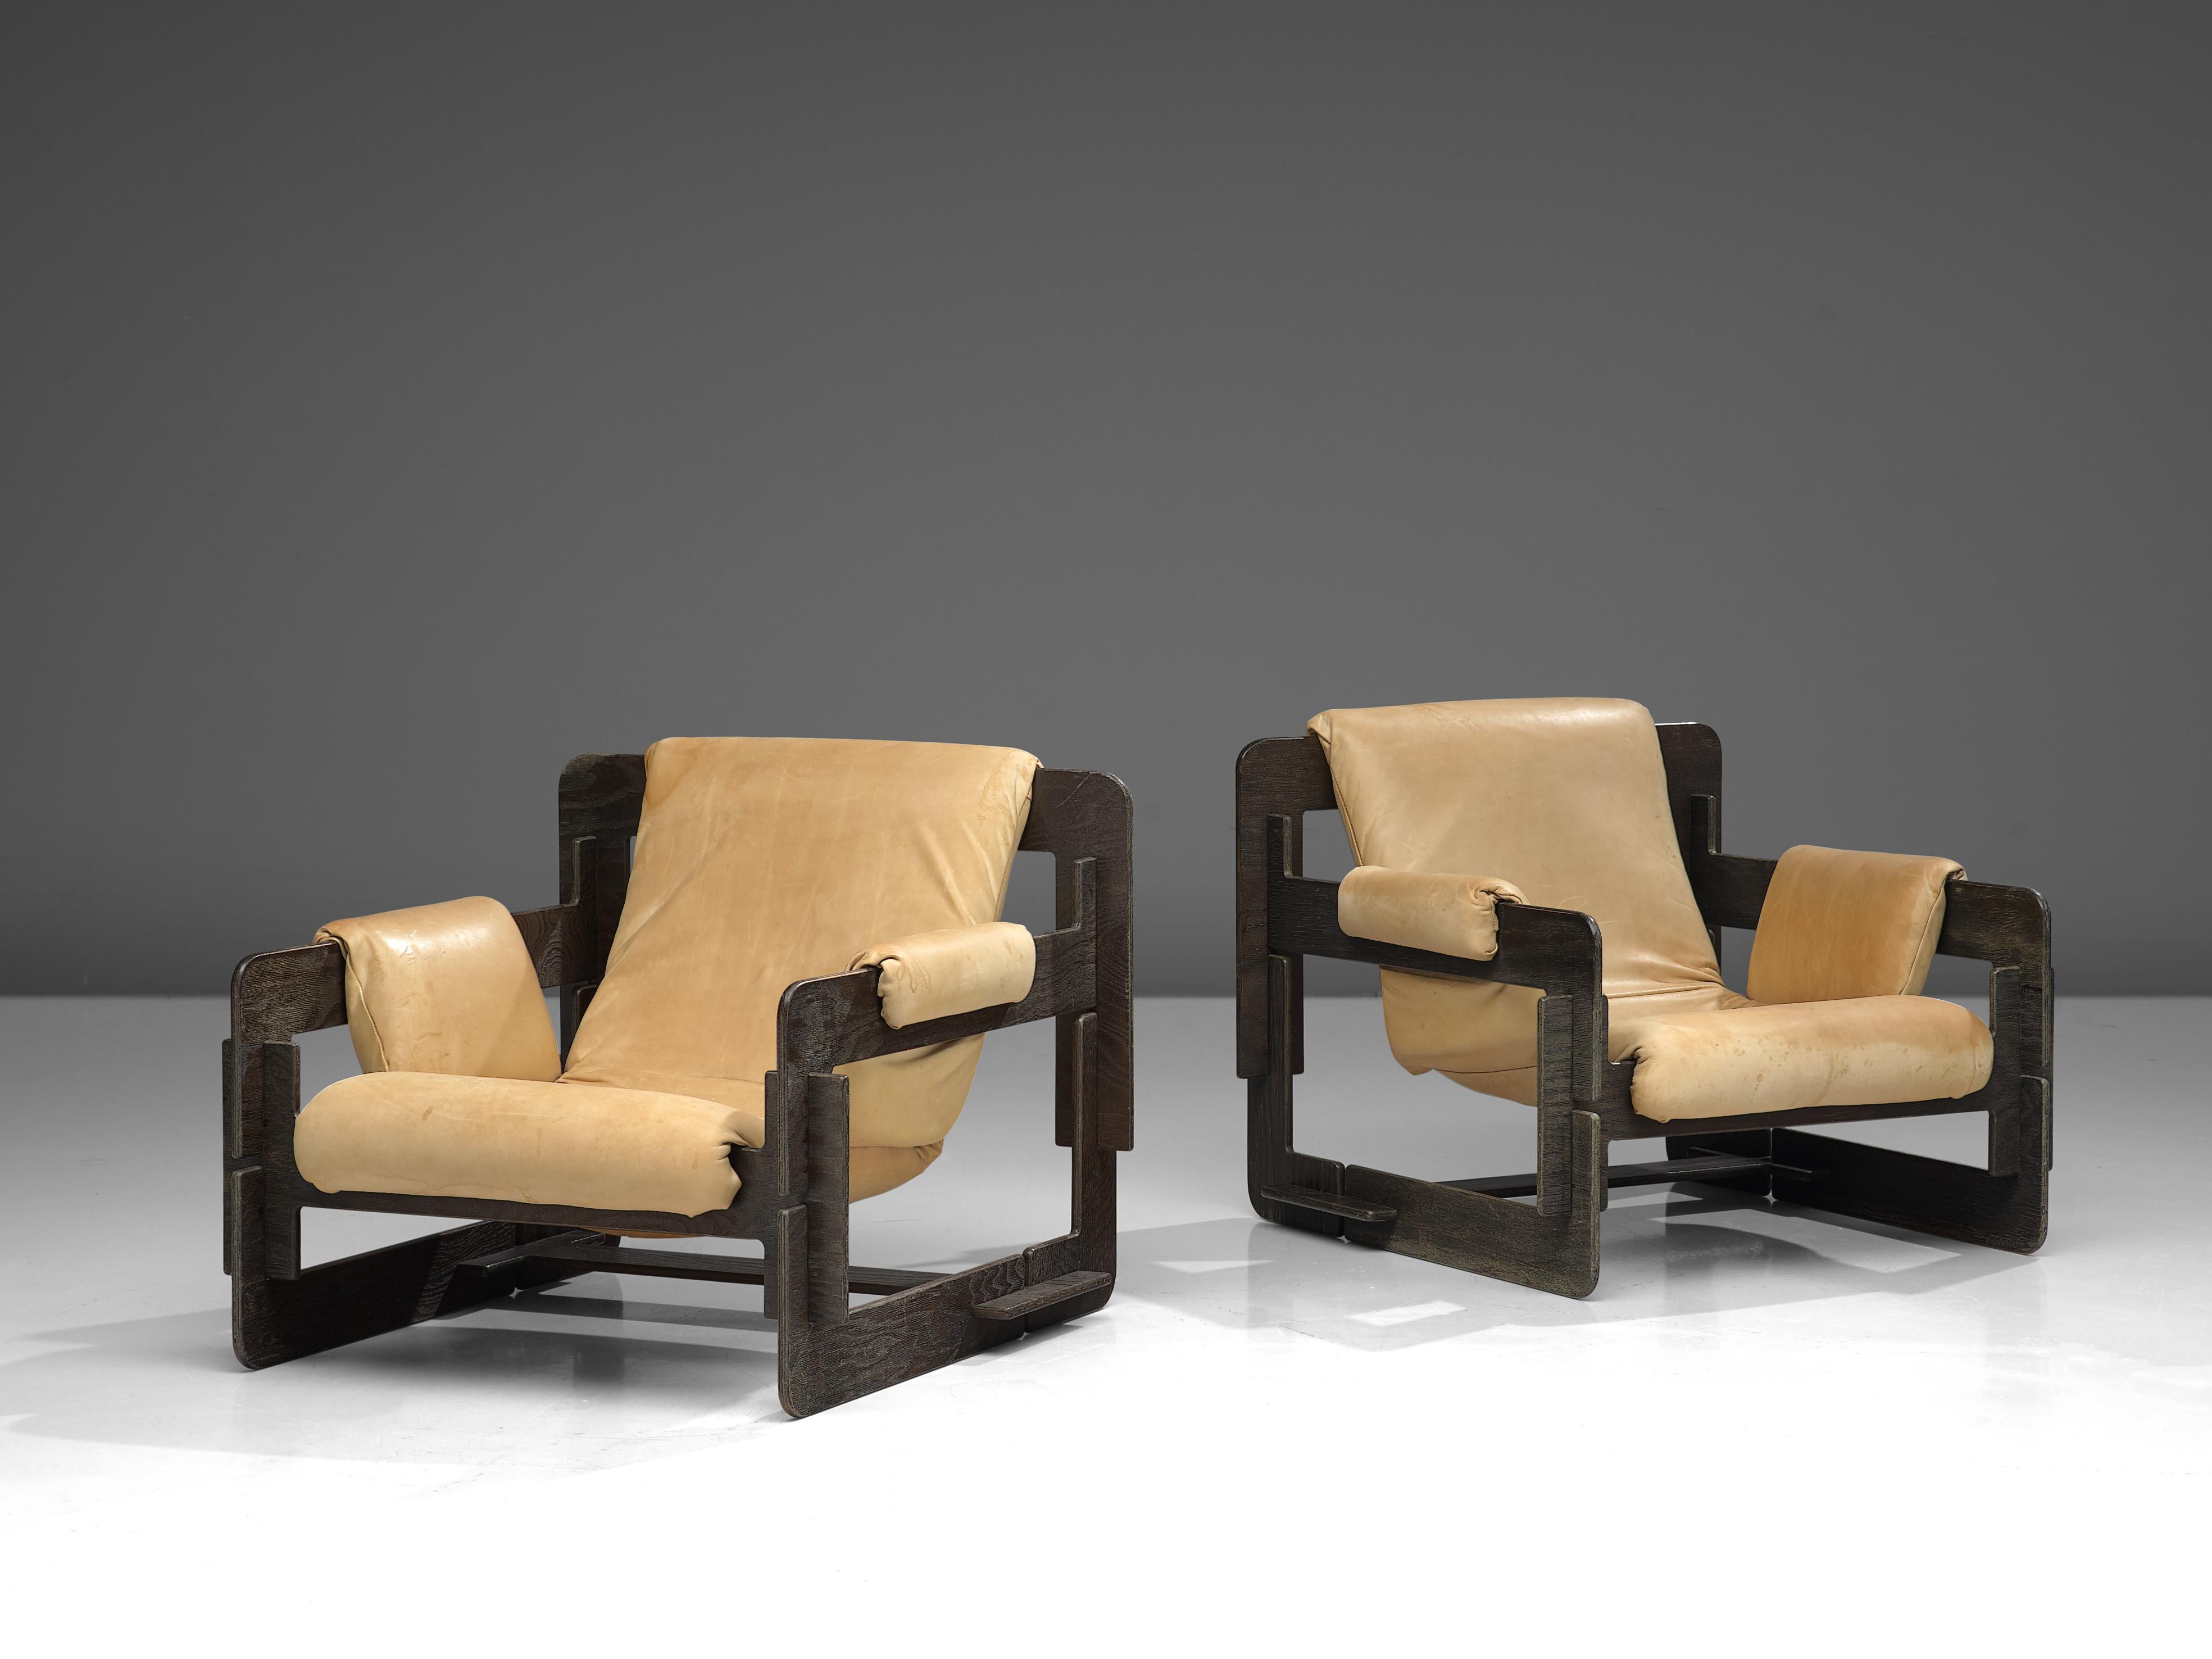 Arne Jacobsen, pair of lounge chairs model 'Rover', plywood, leather, Denmark, 1960s.

This characteristic pair of cubic lounge chairs, designed by Arne Jacobsen, is made in patinated leather and darkened plywood. The seat is floating, thanks to